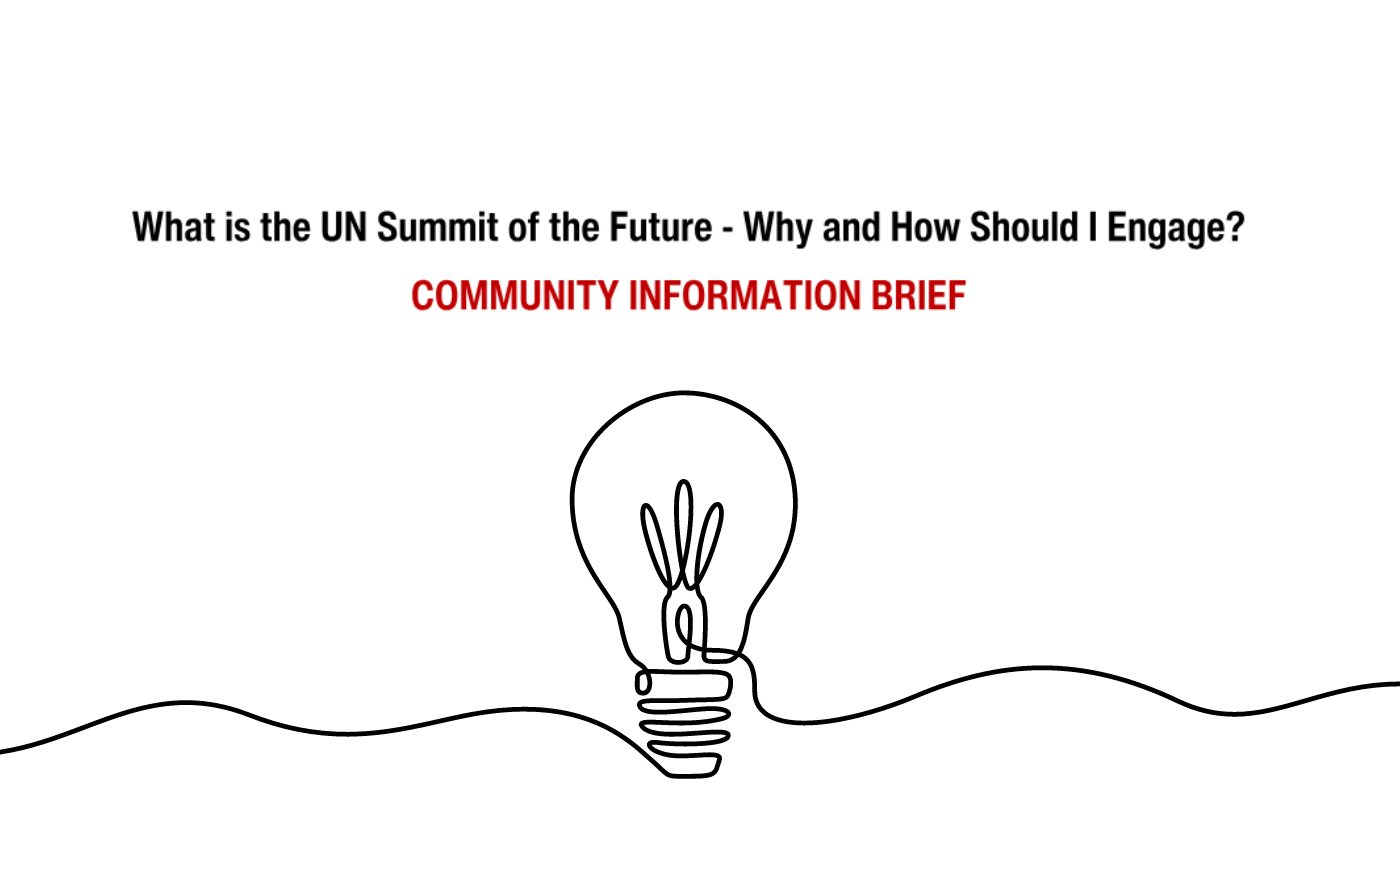 What is the UN Summit of the Future Community Information Brief